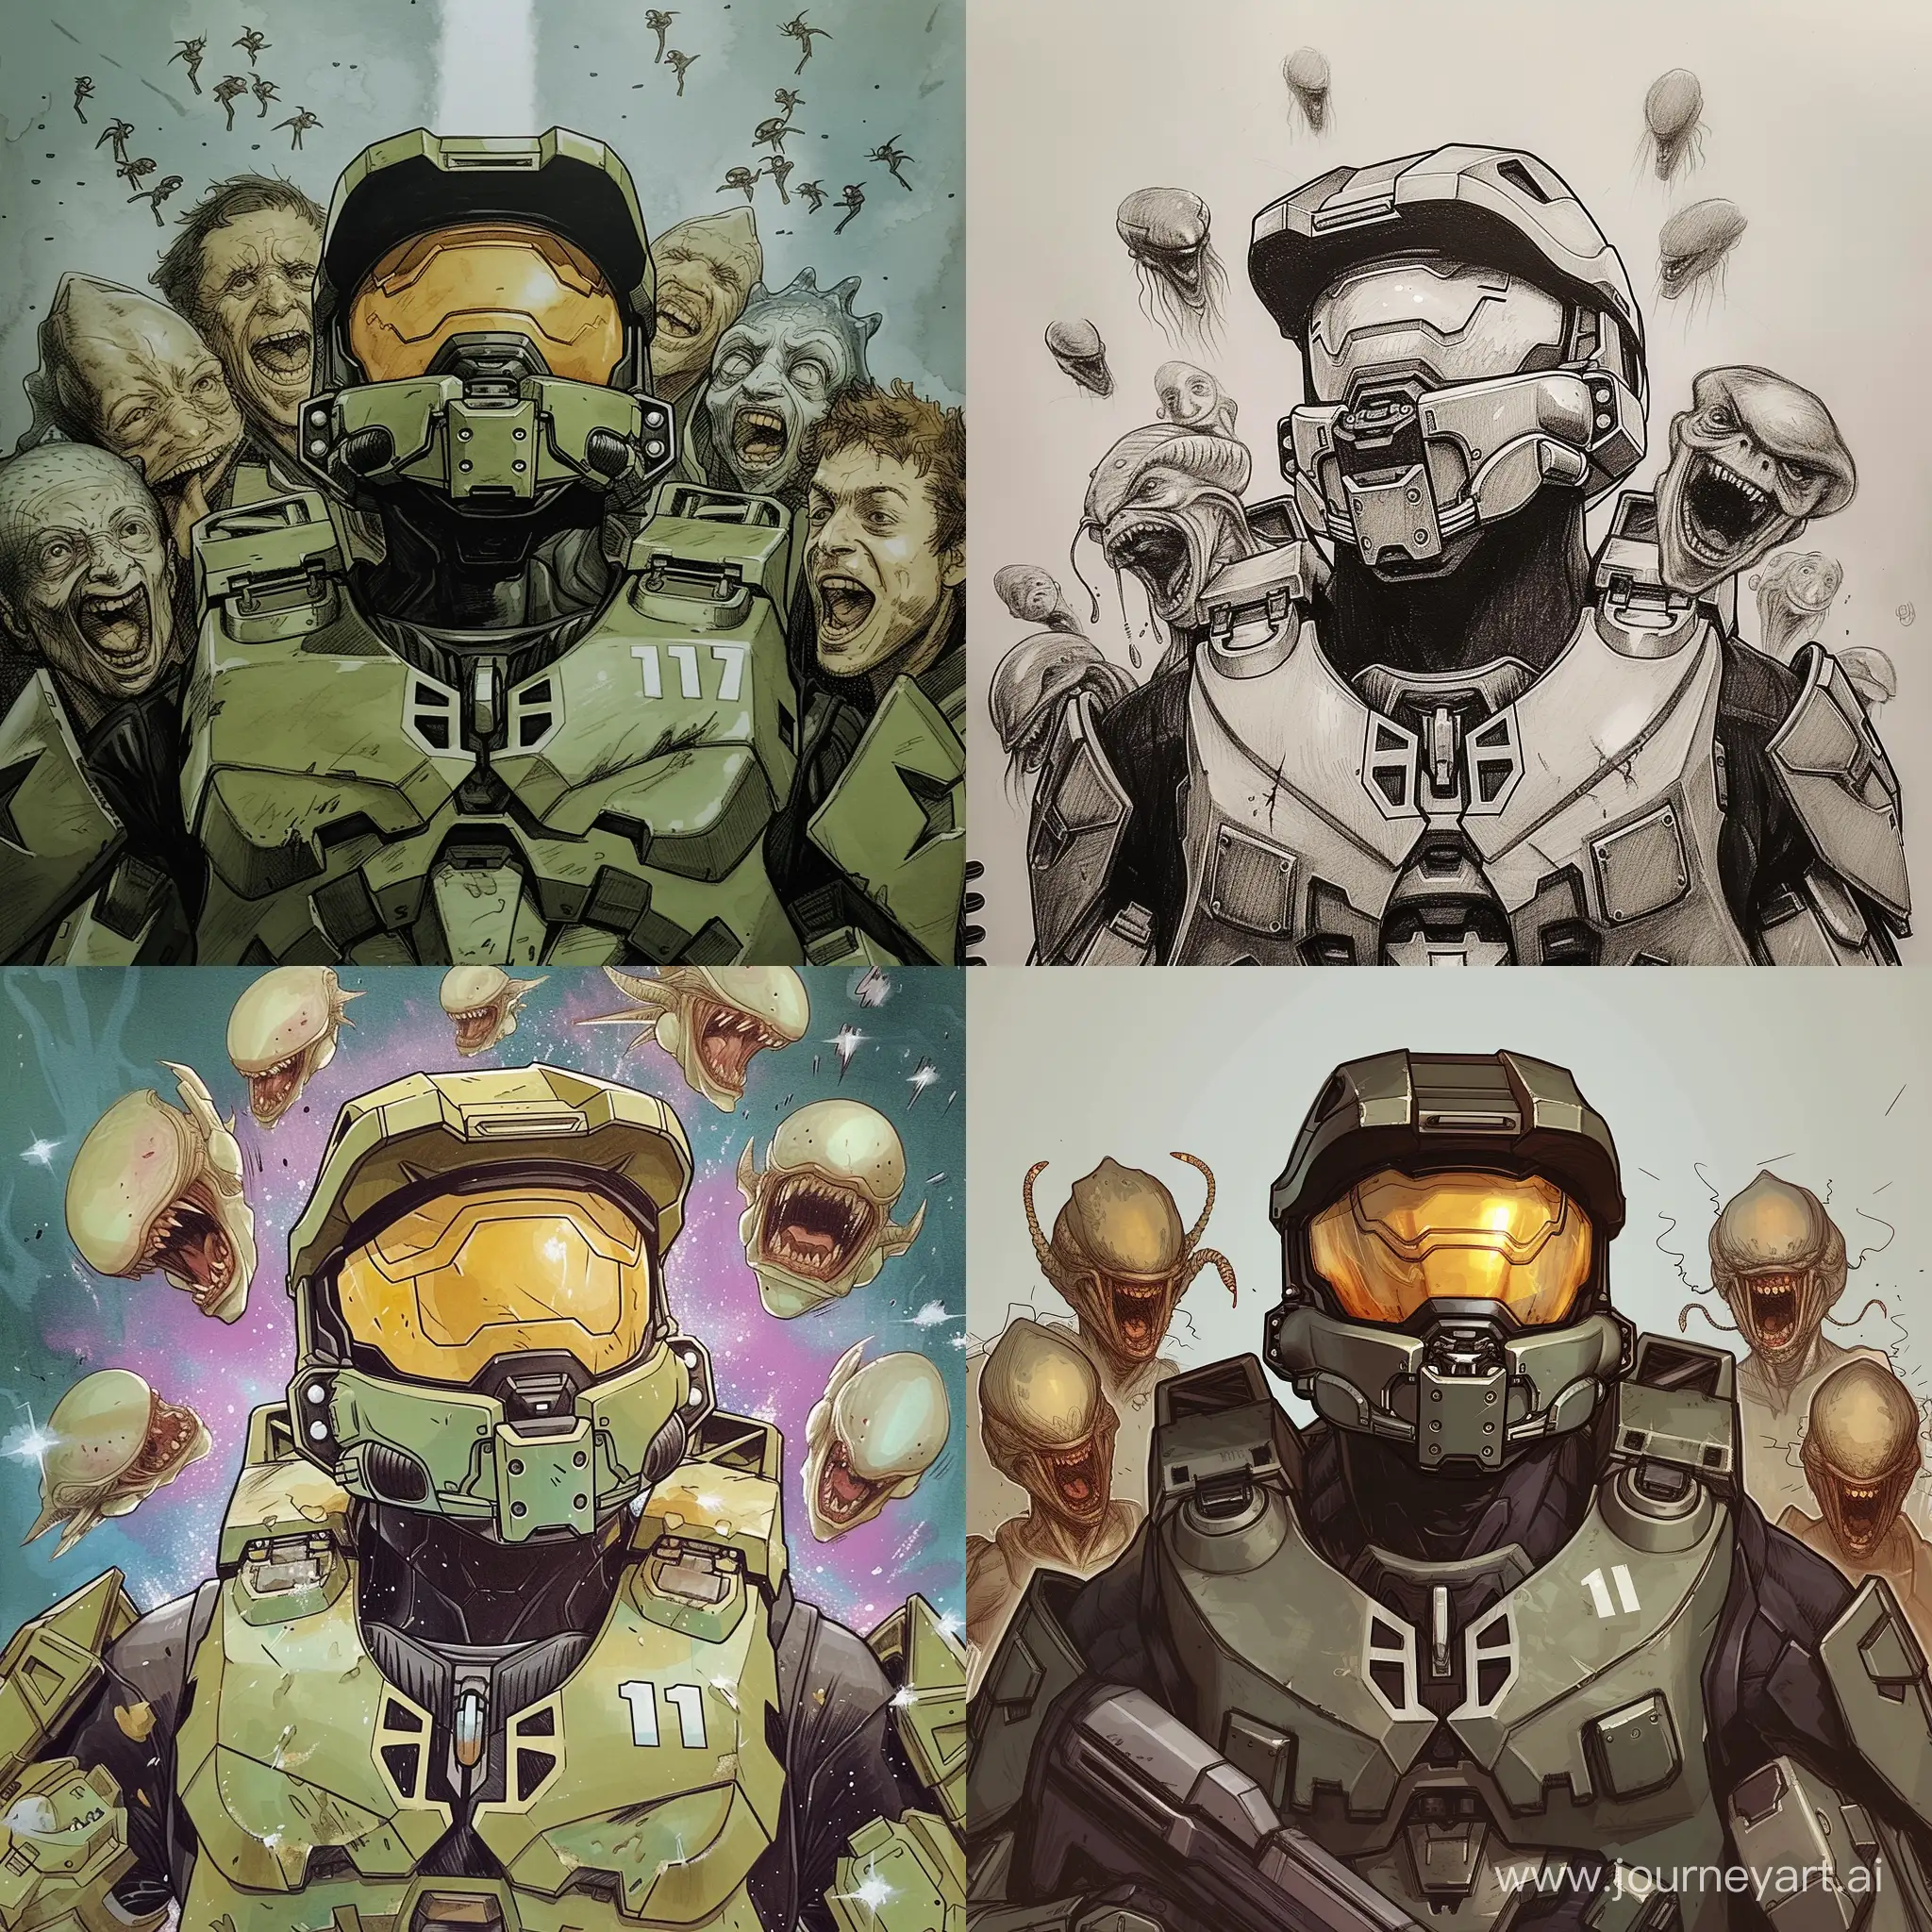 Draw a Master Chief with aliens laughing around him